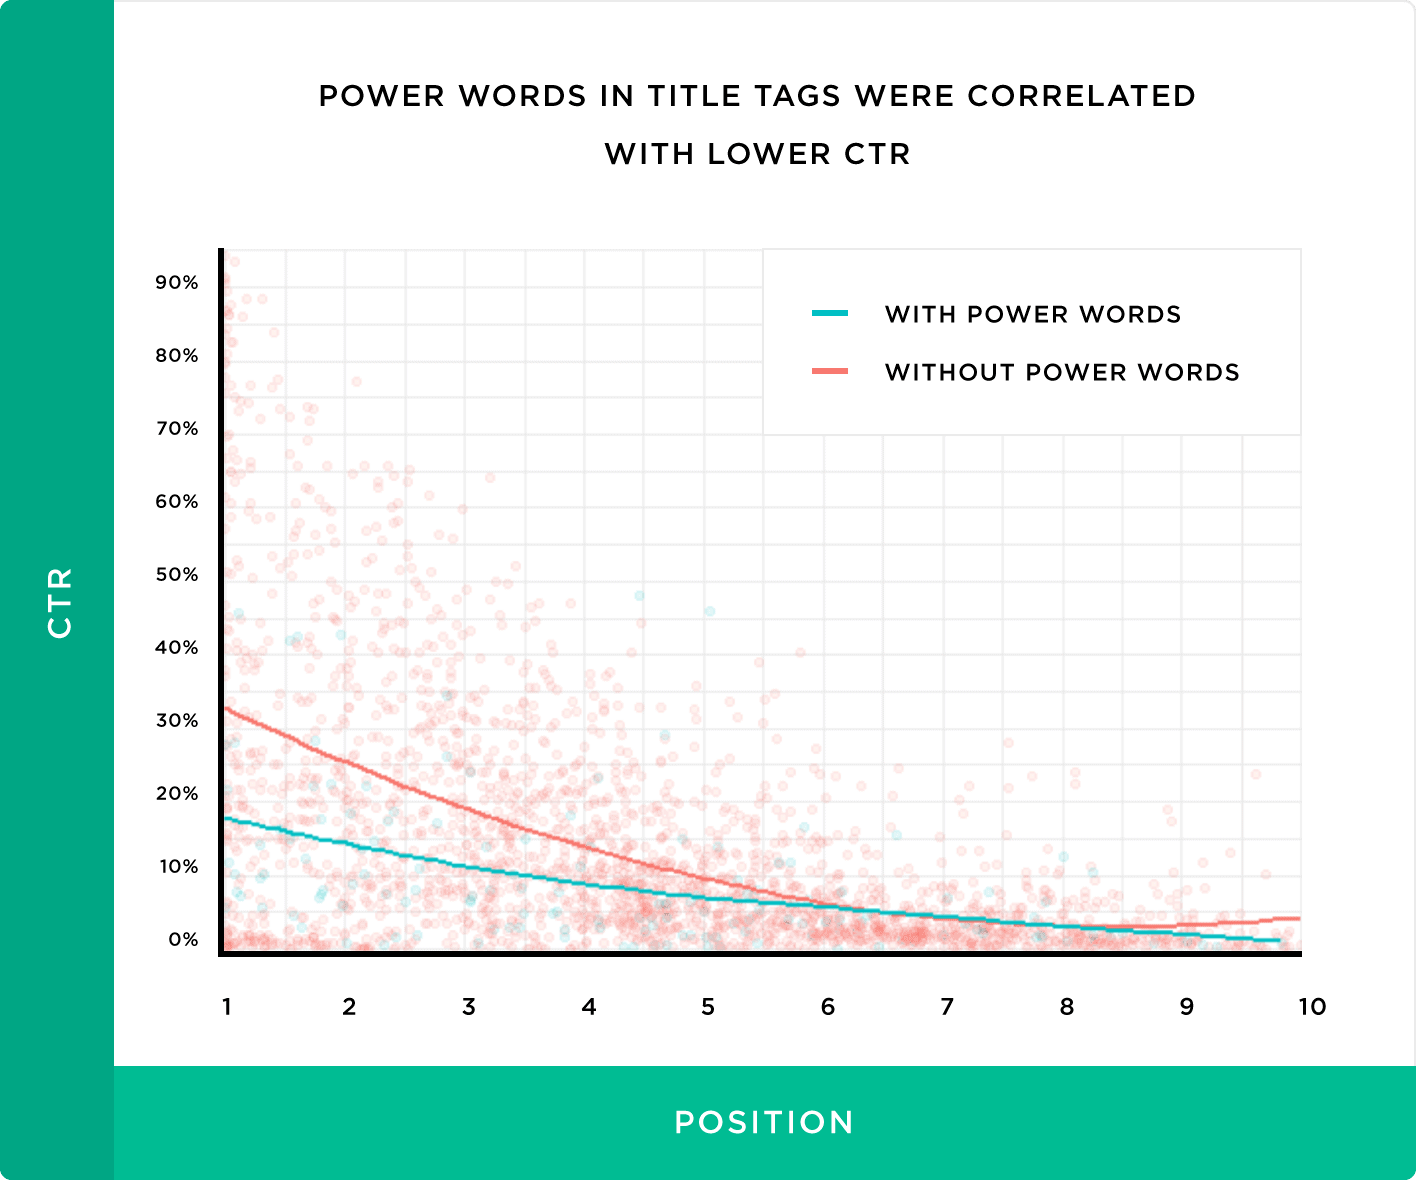 Power words in title tags were correlated with lower CTR